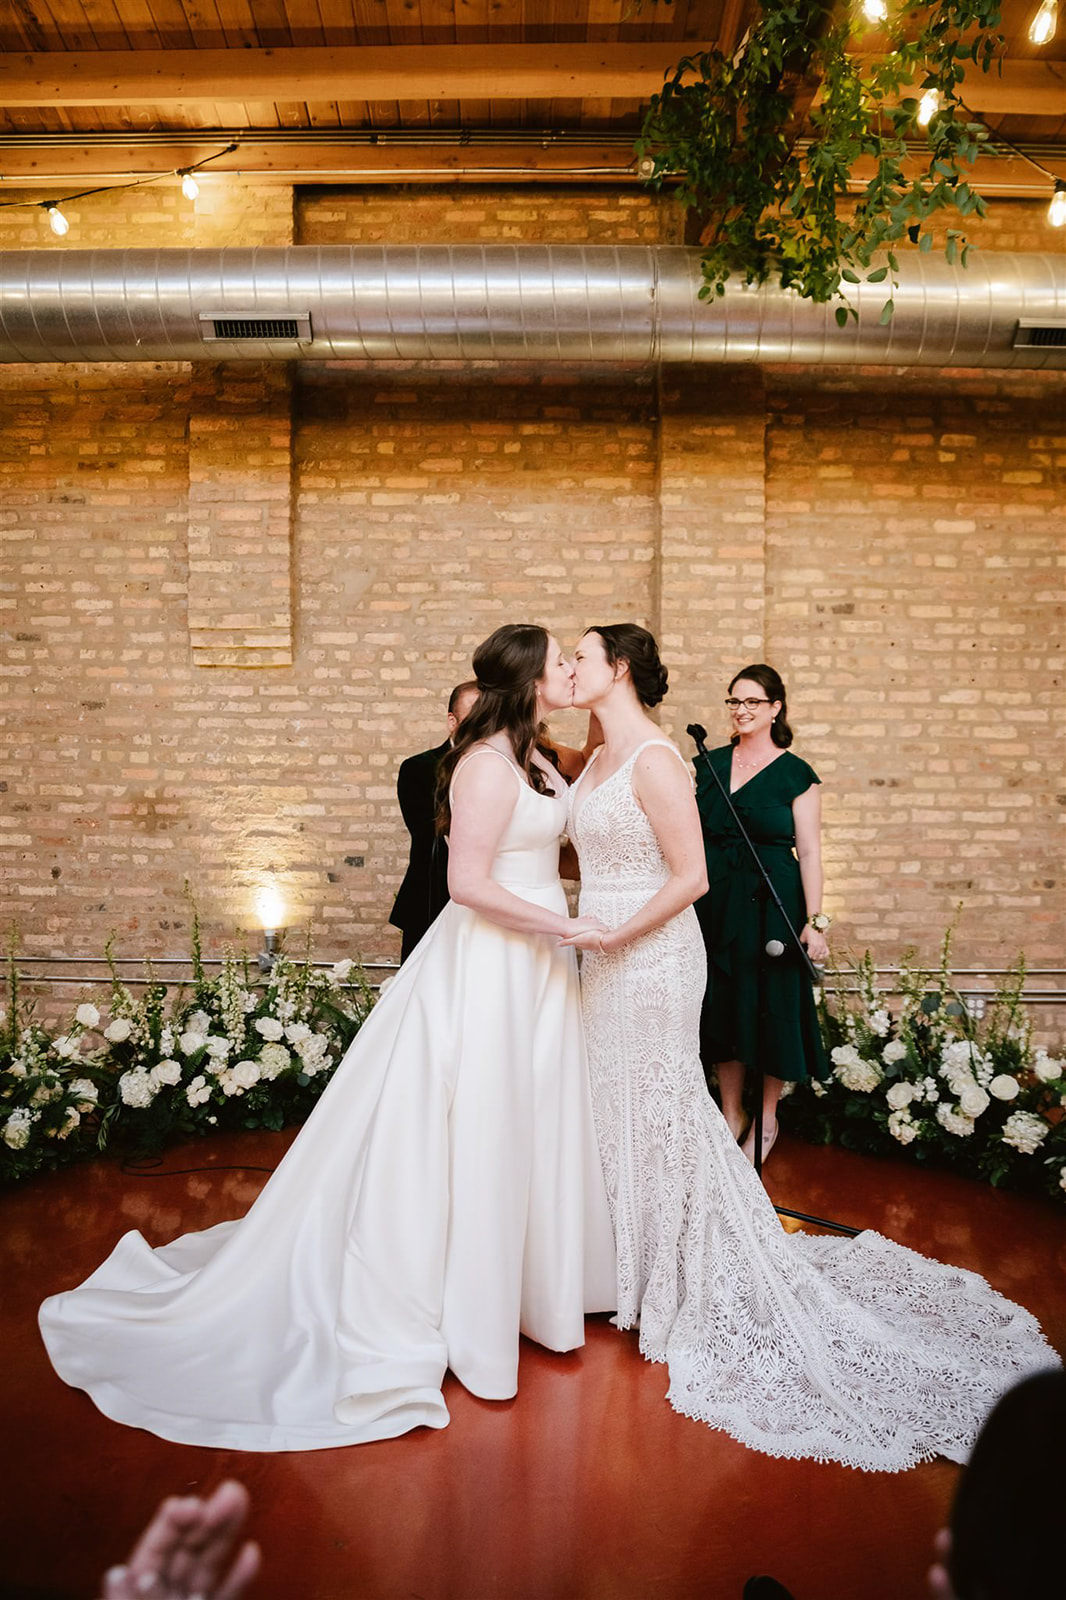 Two brides share their first kiss as a married couple at Loft on Lake, a heartwarming moment filled with love and joy.